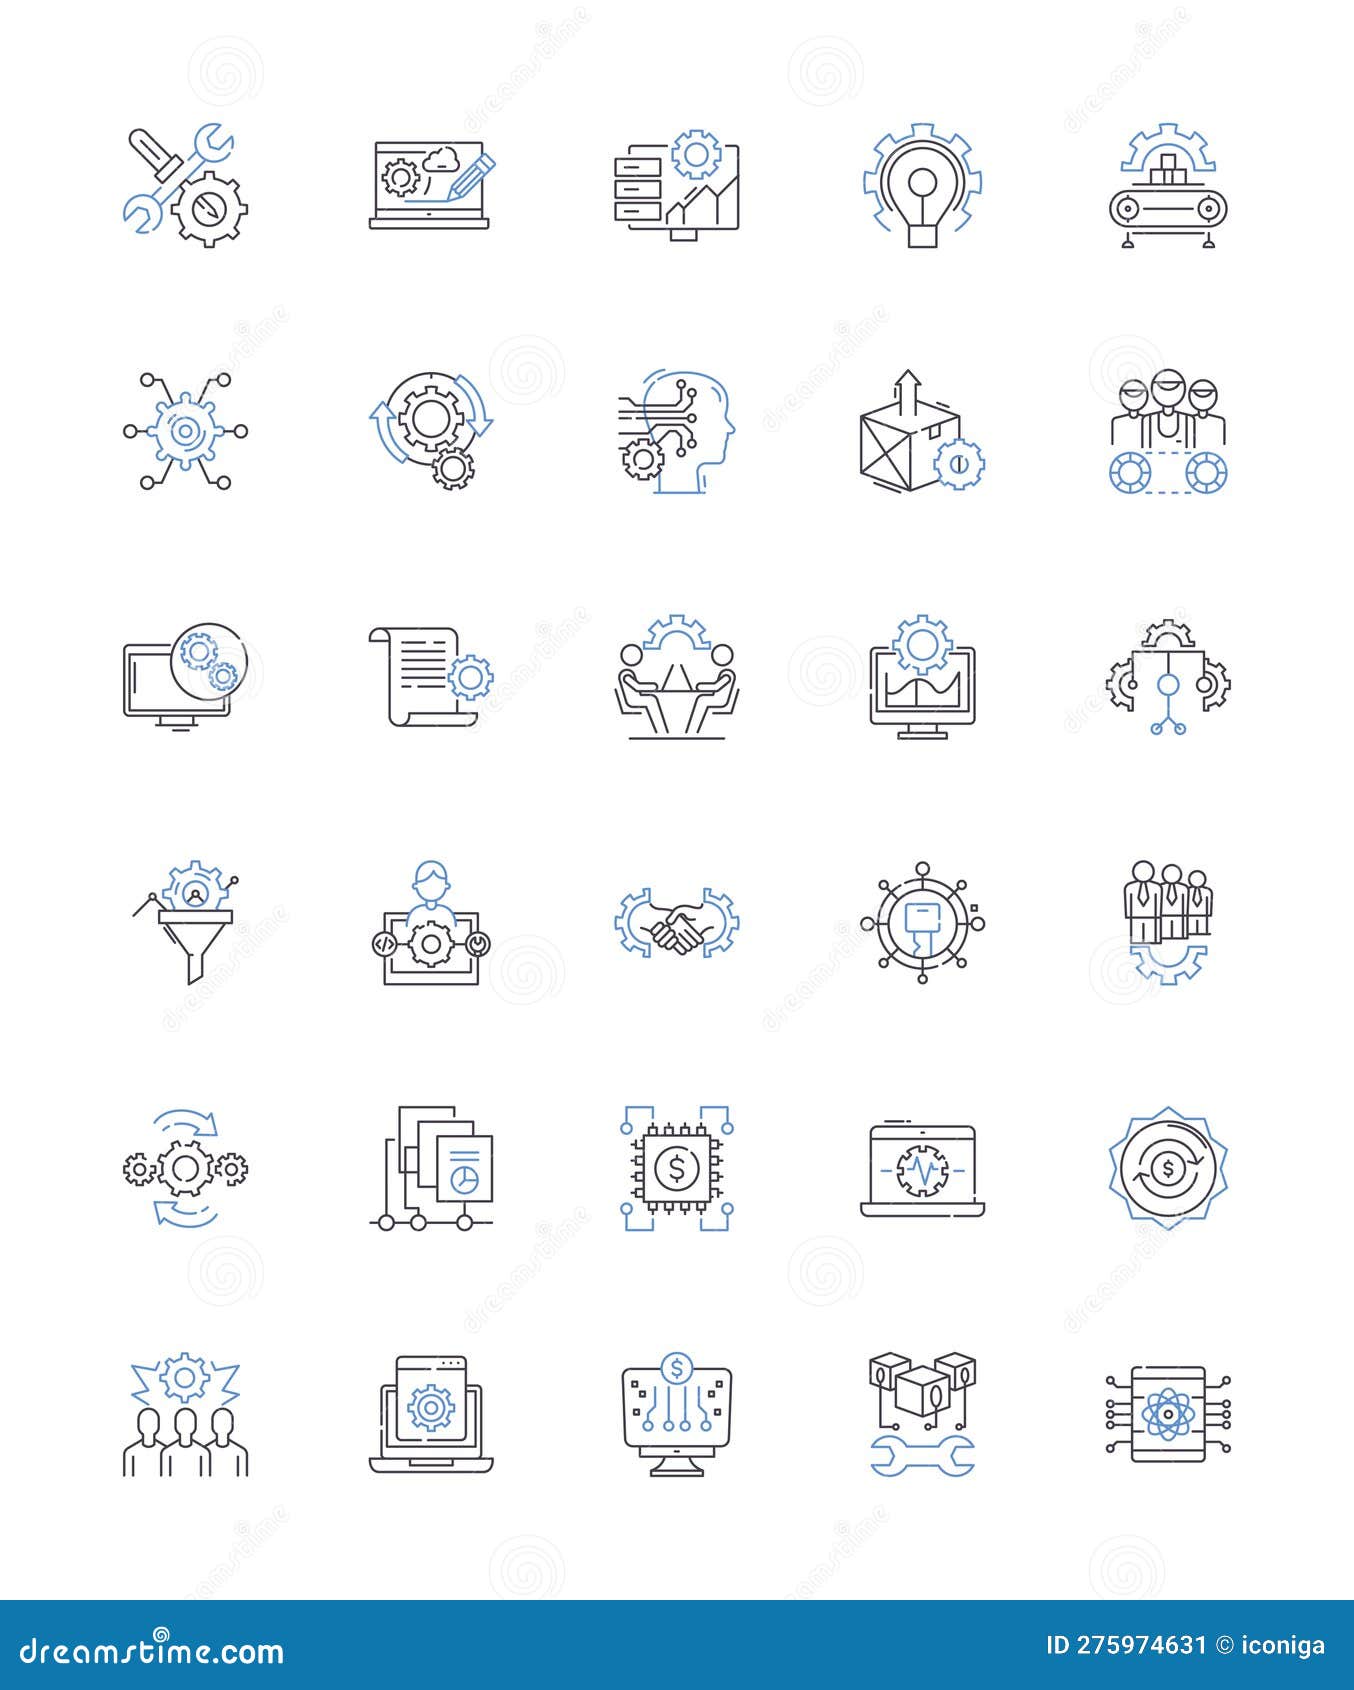 conditions line icons collection. ailment, affliction, disorder, syndrome, illness, disease, malady  and linear